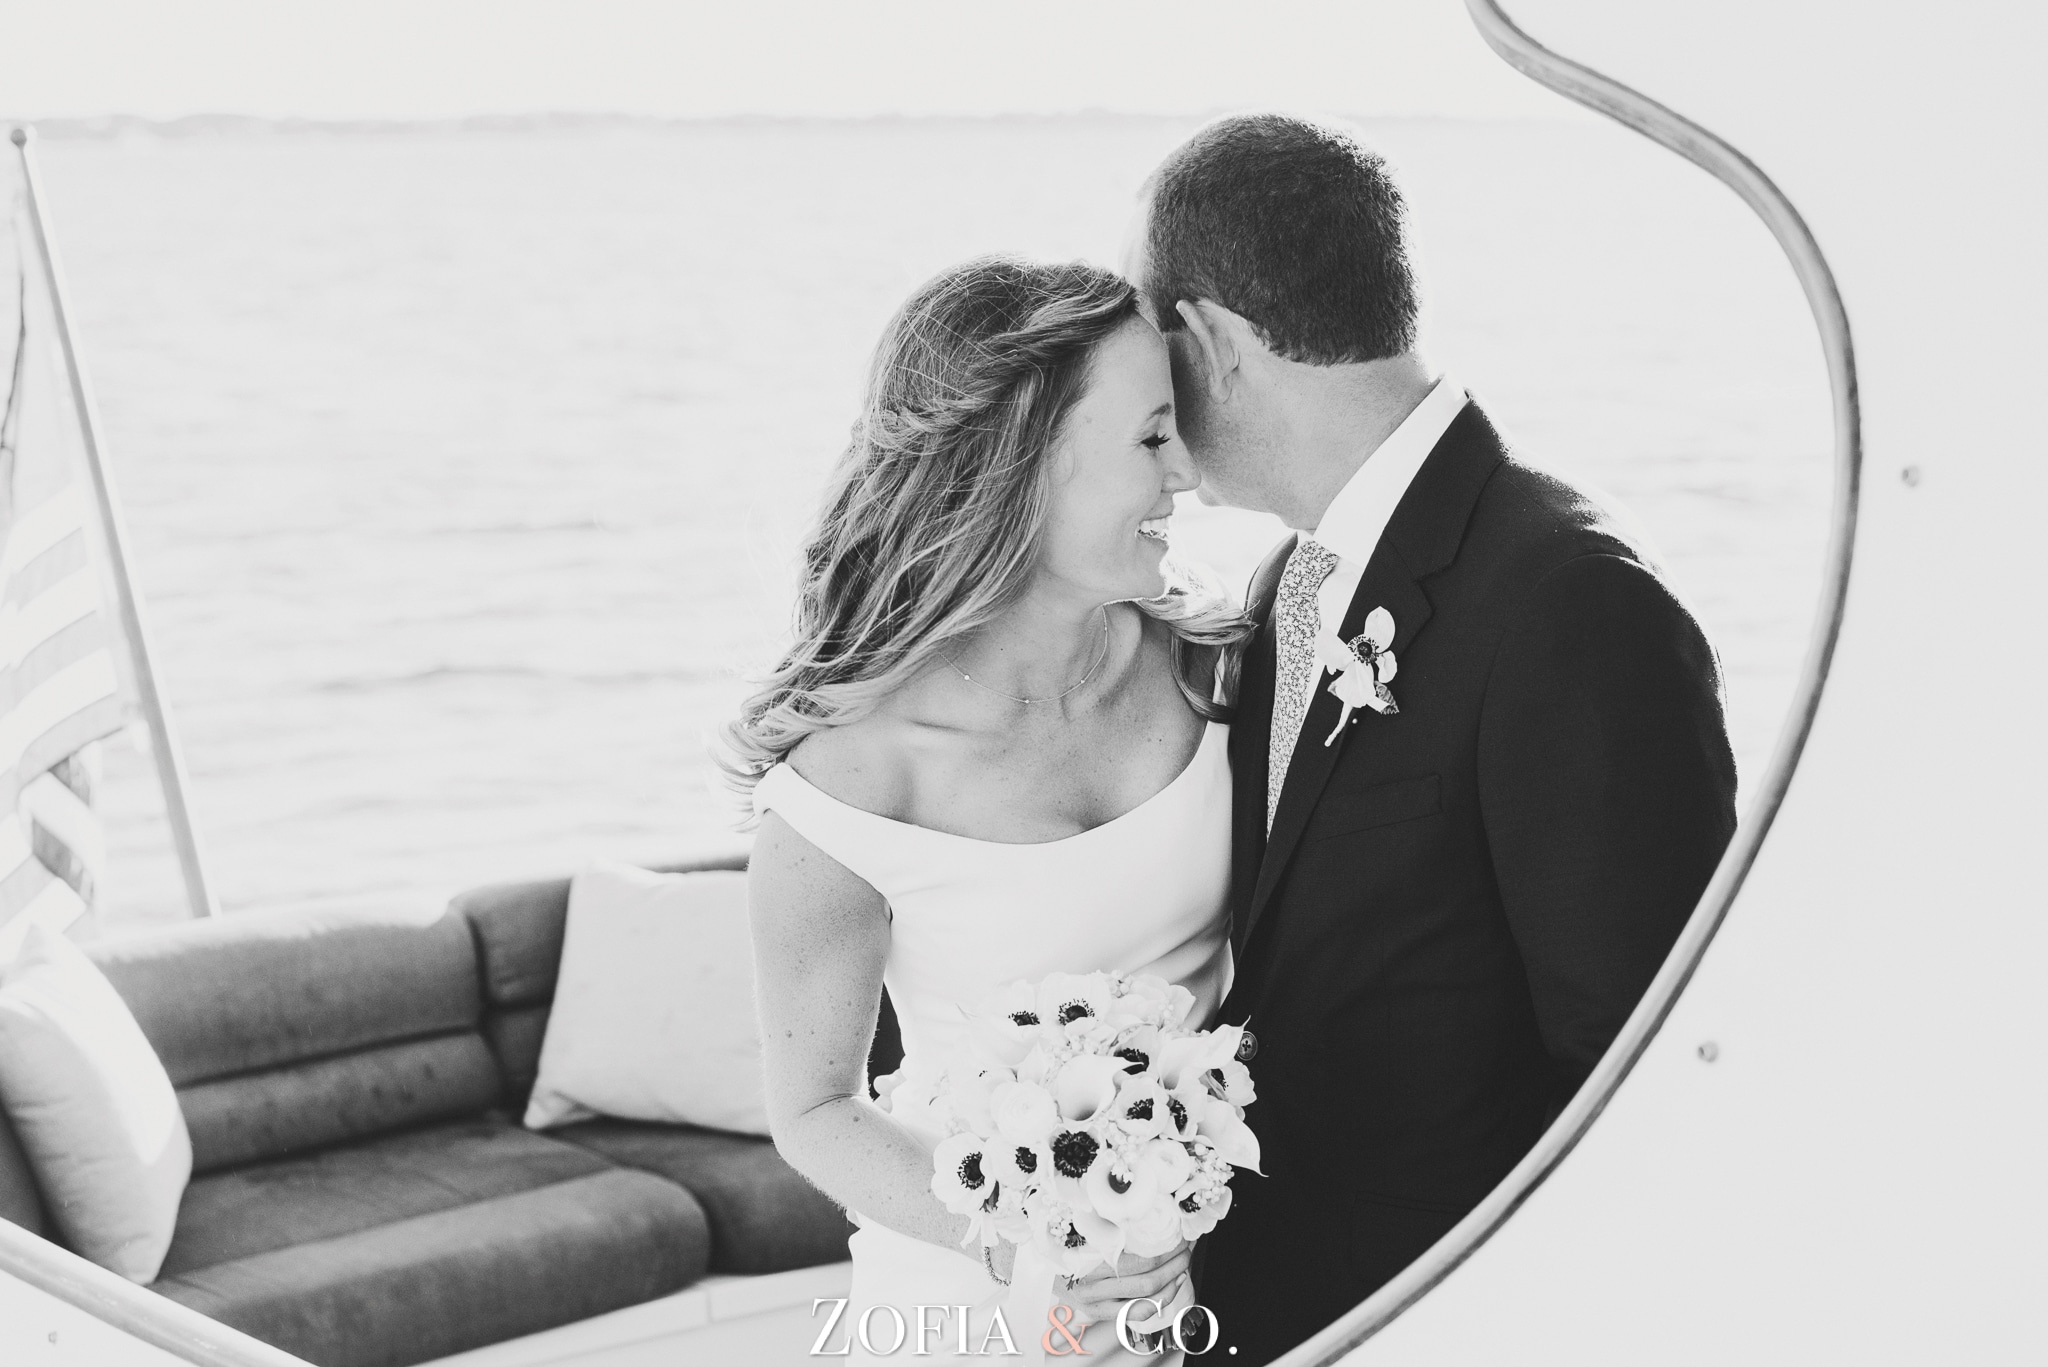 Nantucket wedding at the Wauwinet by Zofia and Co. with Barton and Gray boat, clear tent reception